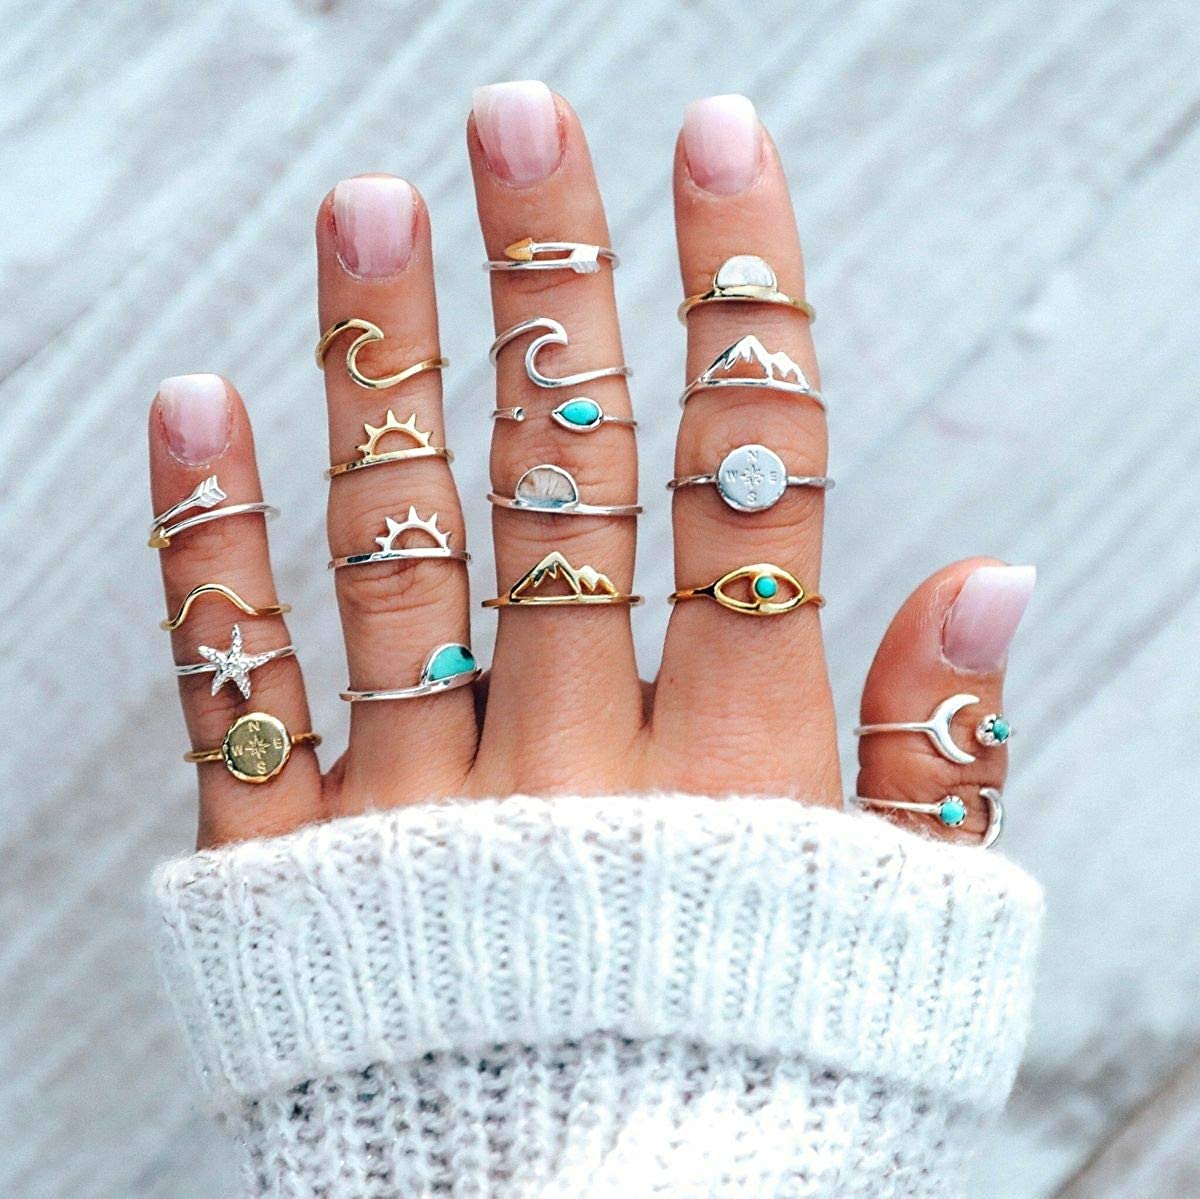 Boho Retro Stackable Rings Sets for Teens Girls Women,Peak Sea Wave Compass Turquoise Rhinestone Knuckle Joint Finger Kunckle Nail Ring Sets